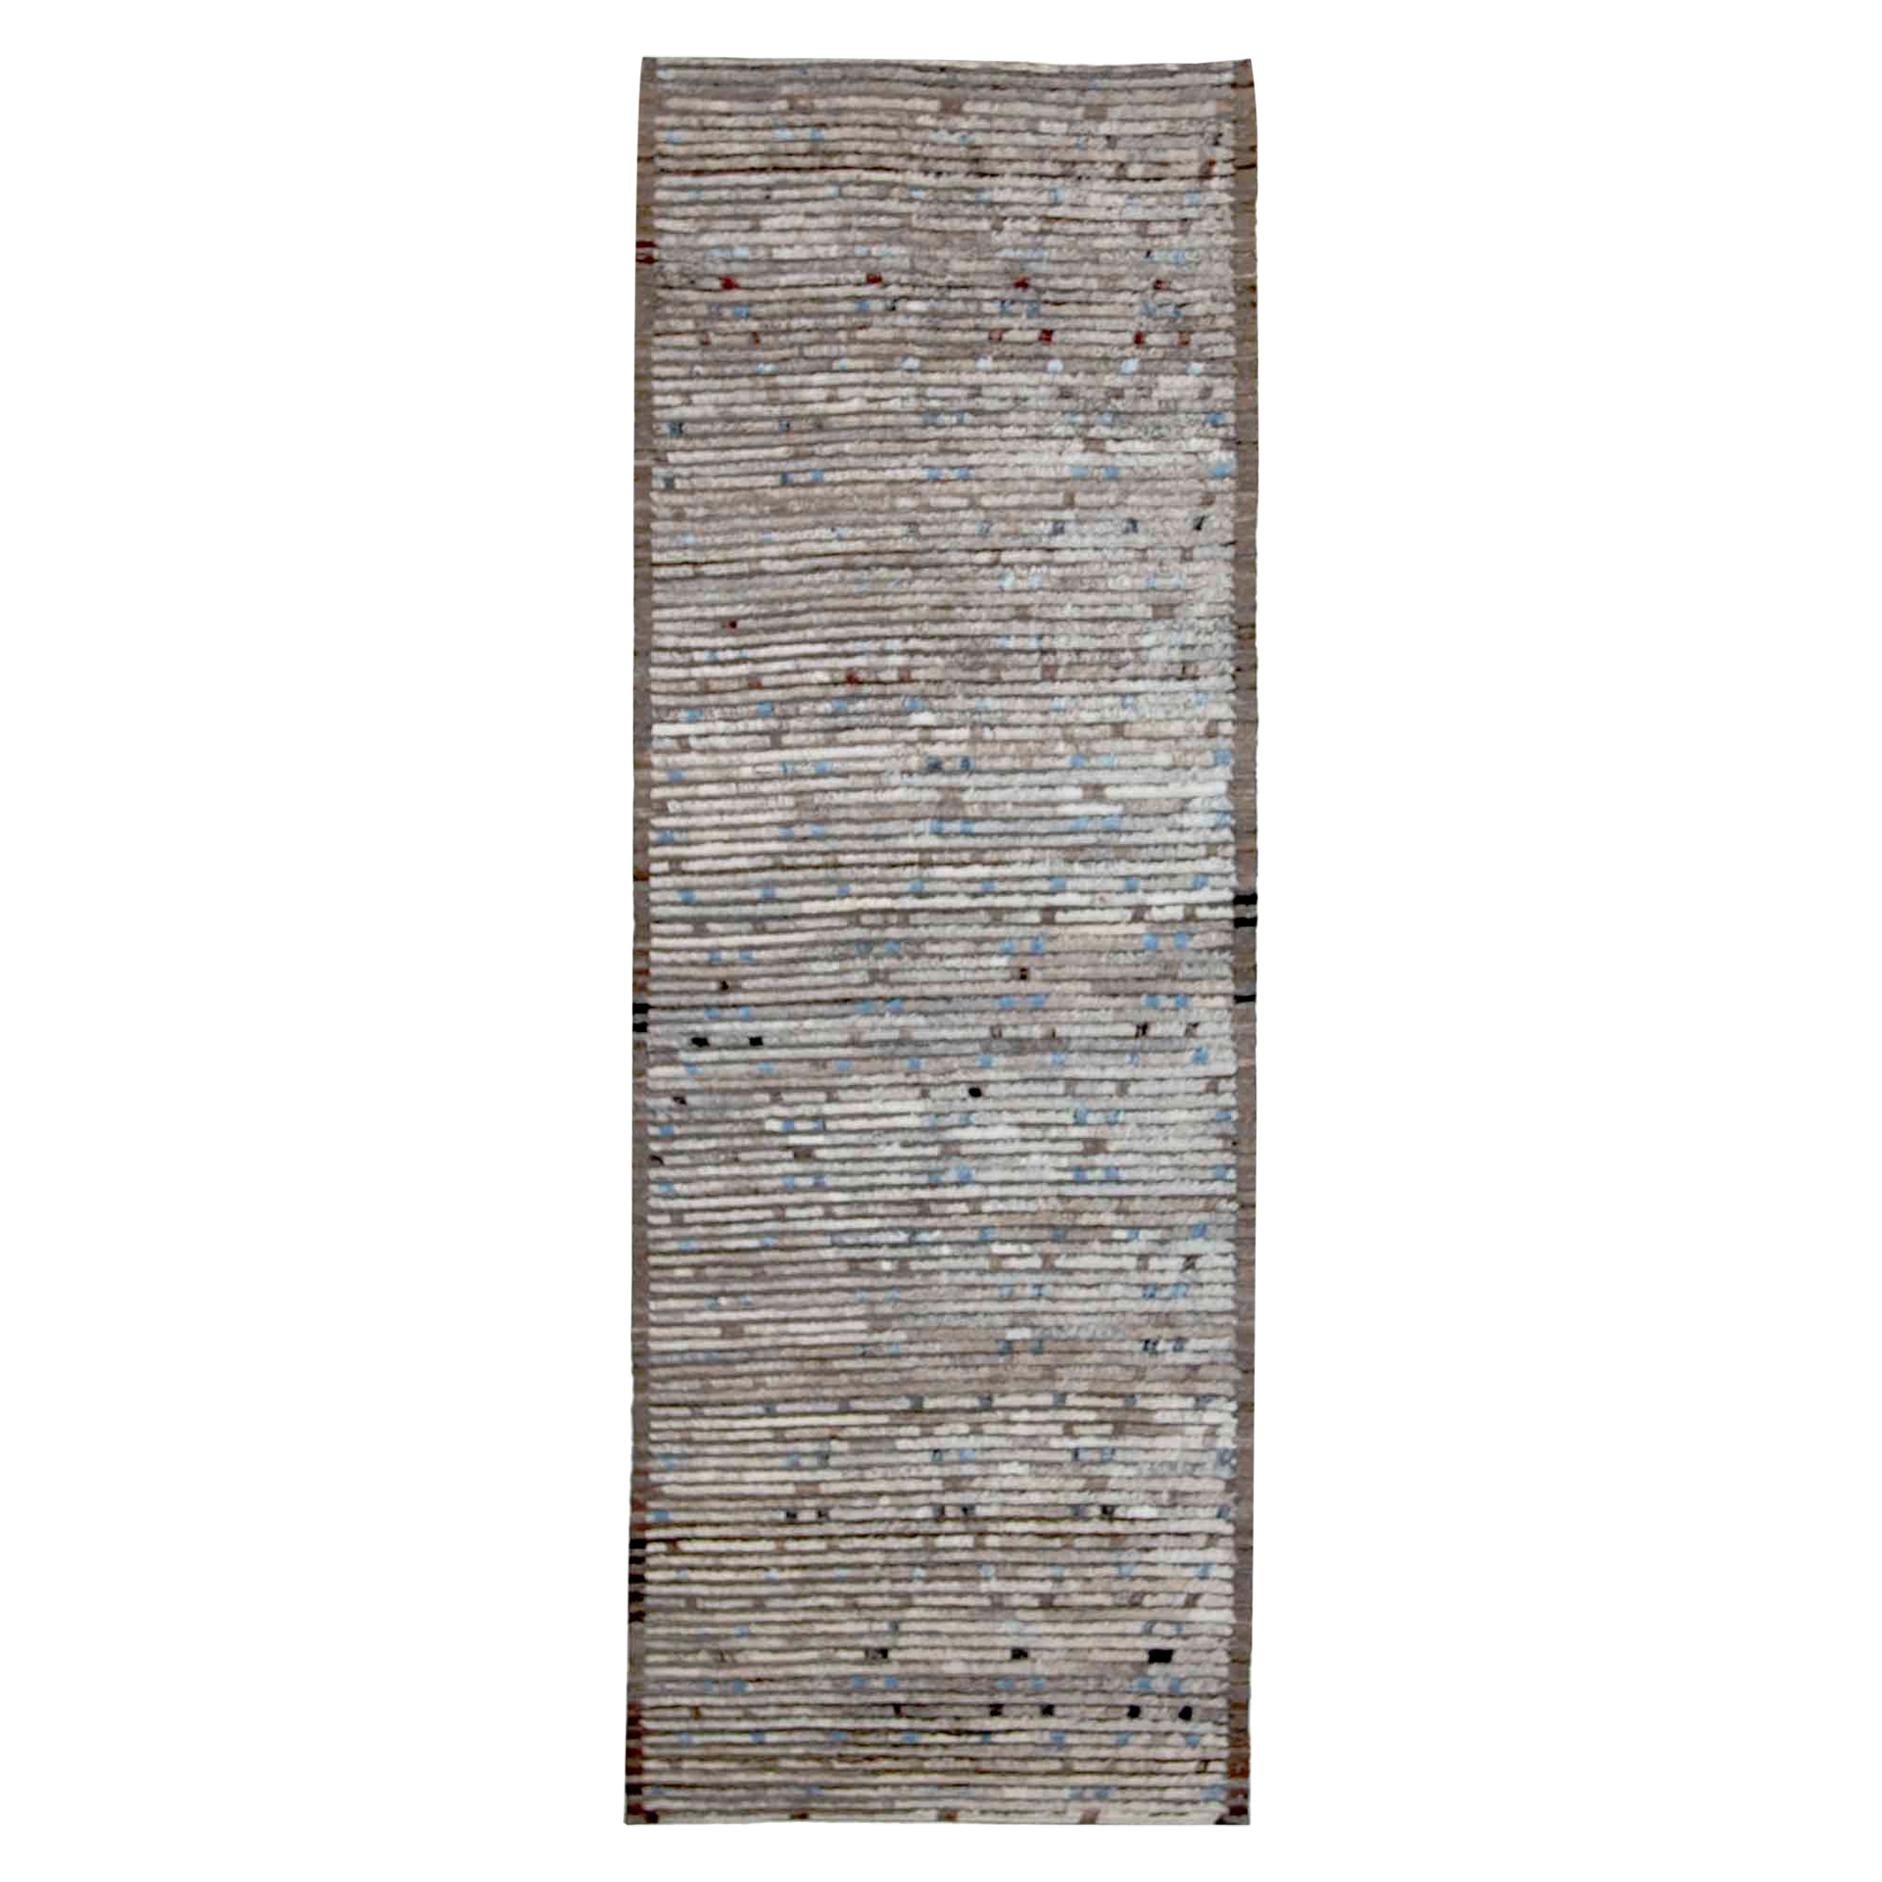 Afghan Moroccan Style Runner Rug in Ivory with Brown & Blue Diagonal Details